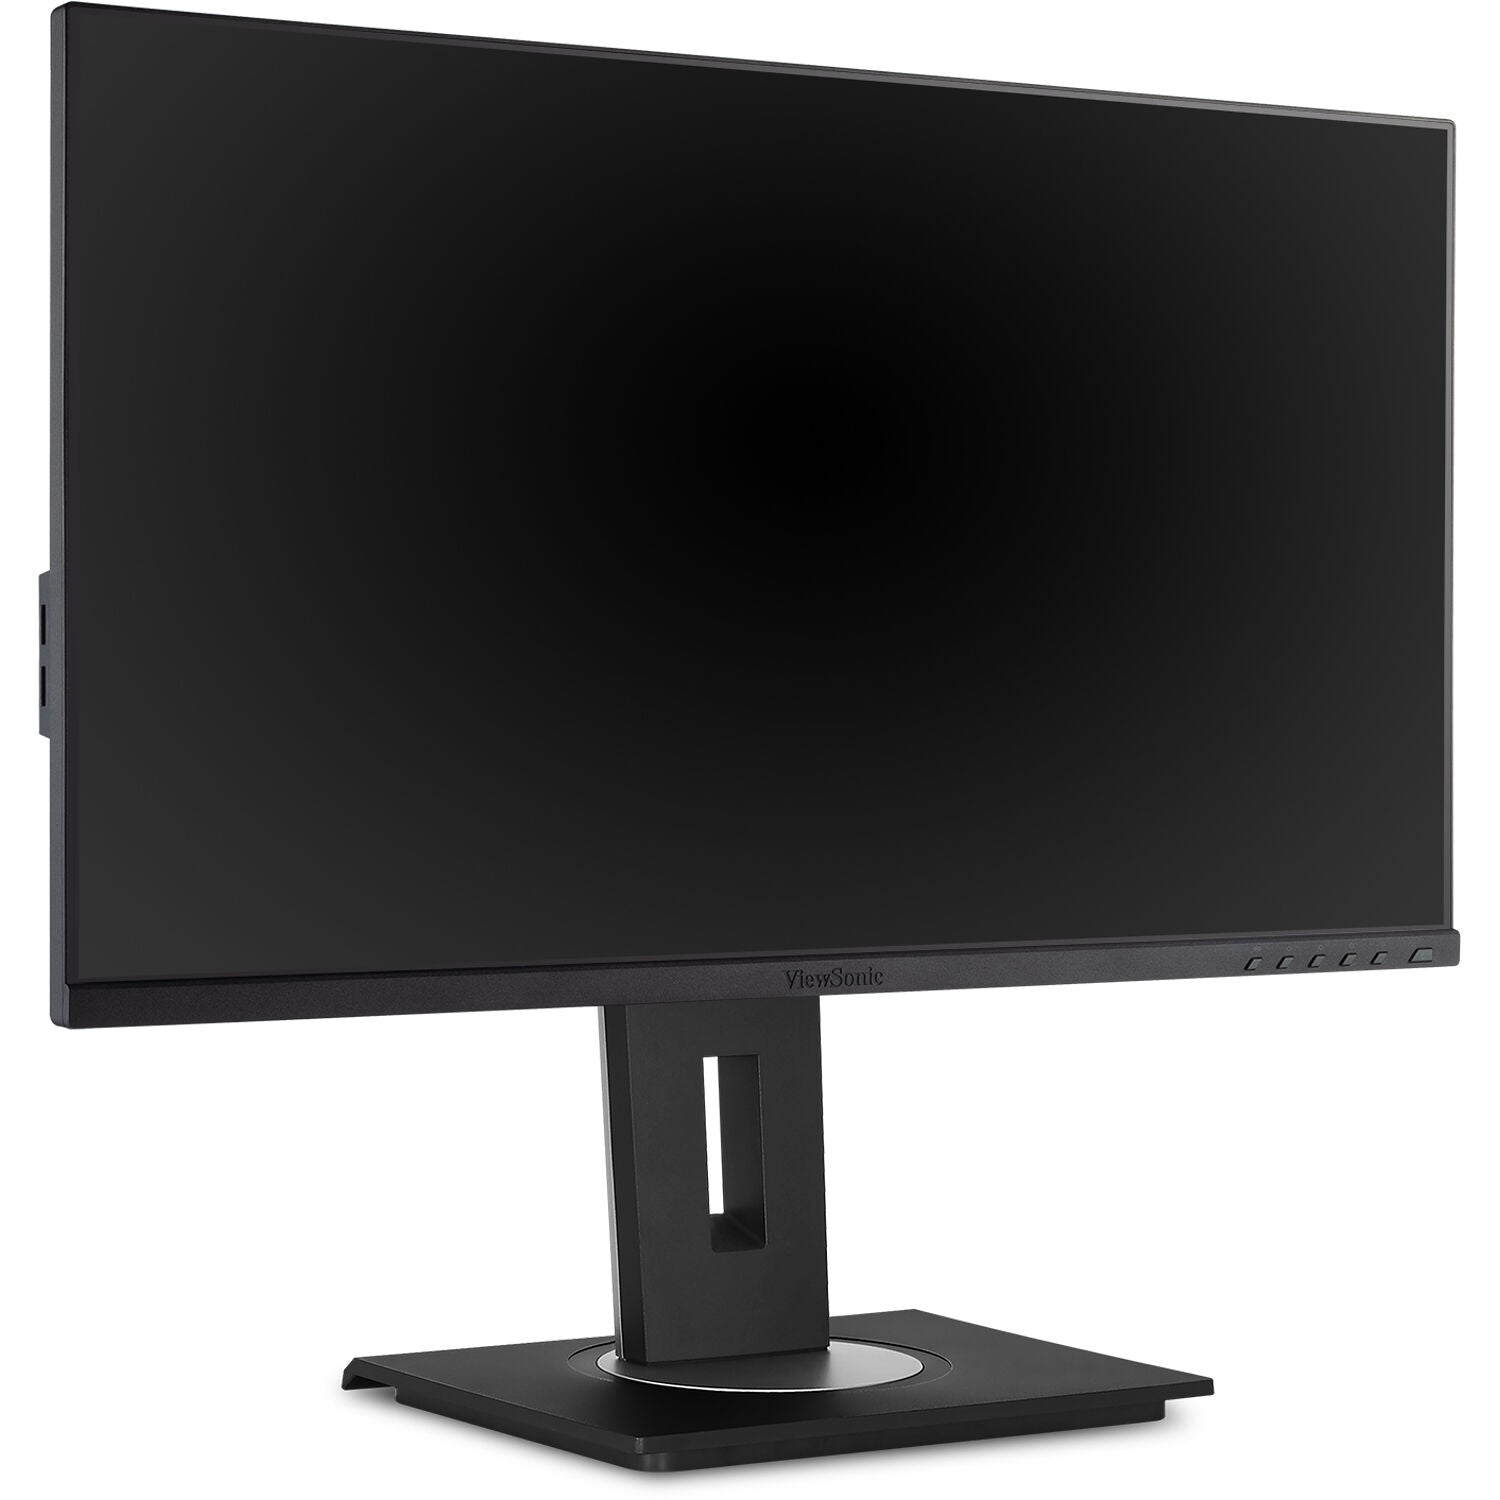 ViewSonic VG2748A-S 27" 16:9 IPS FHD Monitor - Certified Refurbished